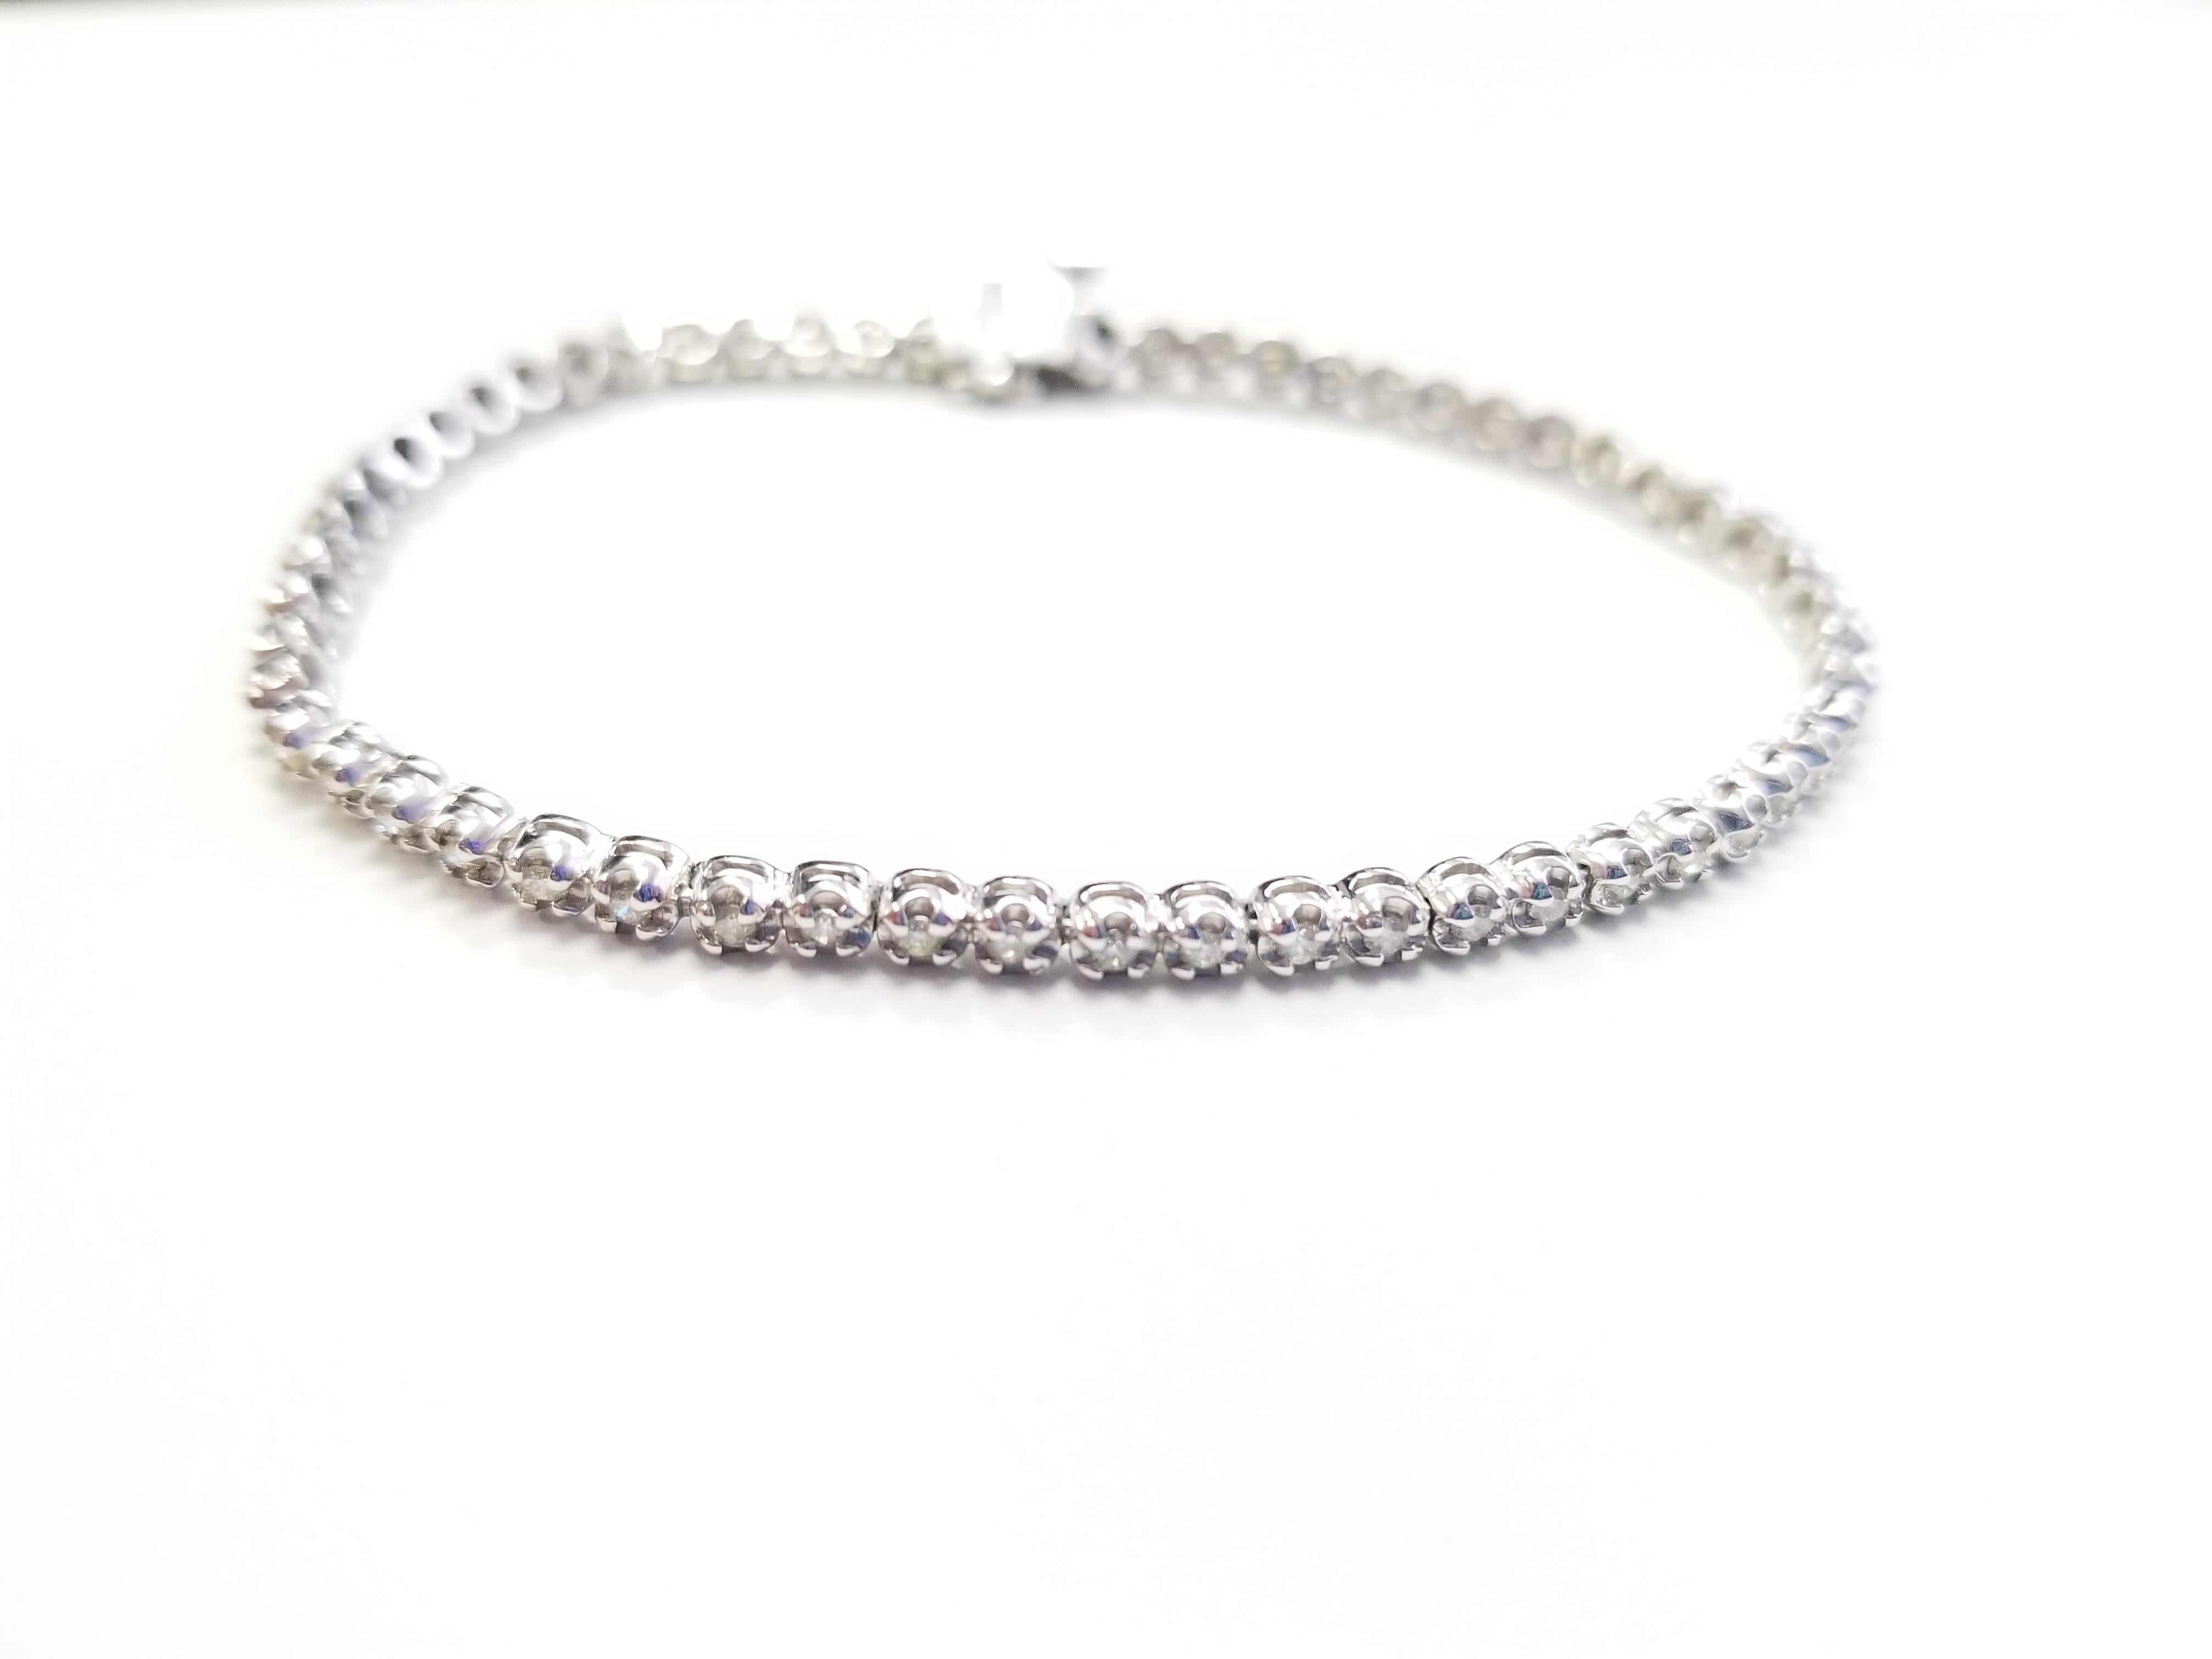 Very sparkling and shiny. a great quality tennis bracelet. 14k white gold. each stone is set in a classic four-prong style for maximum light brilliance. 7 inch length. Color I-J, Clarity SI3-I1